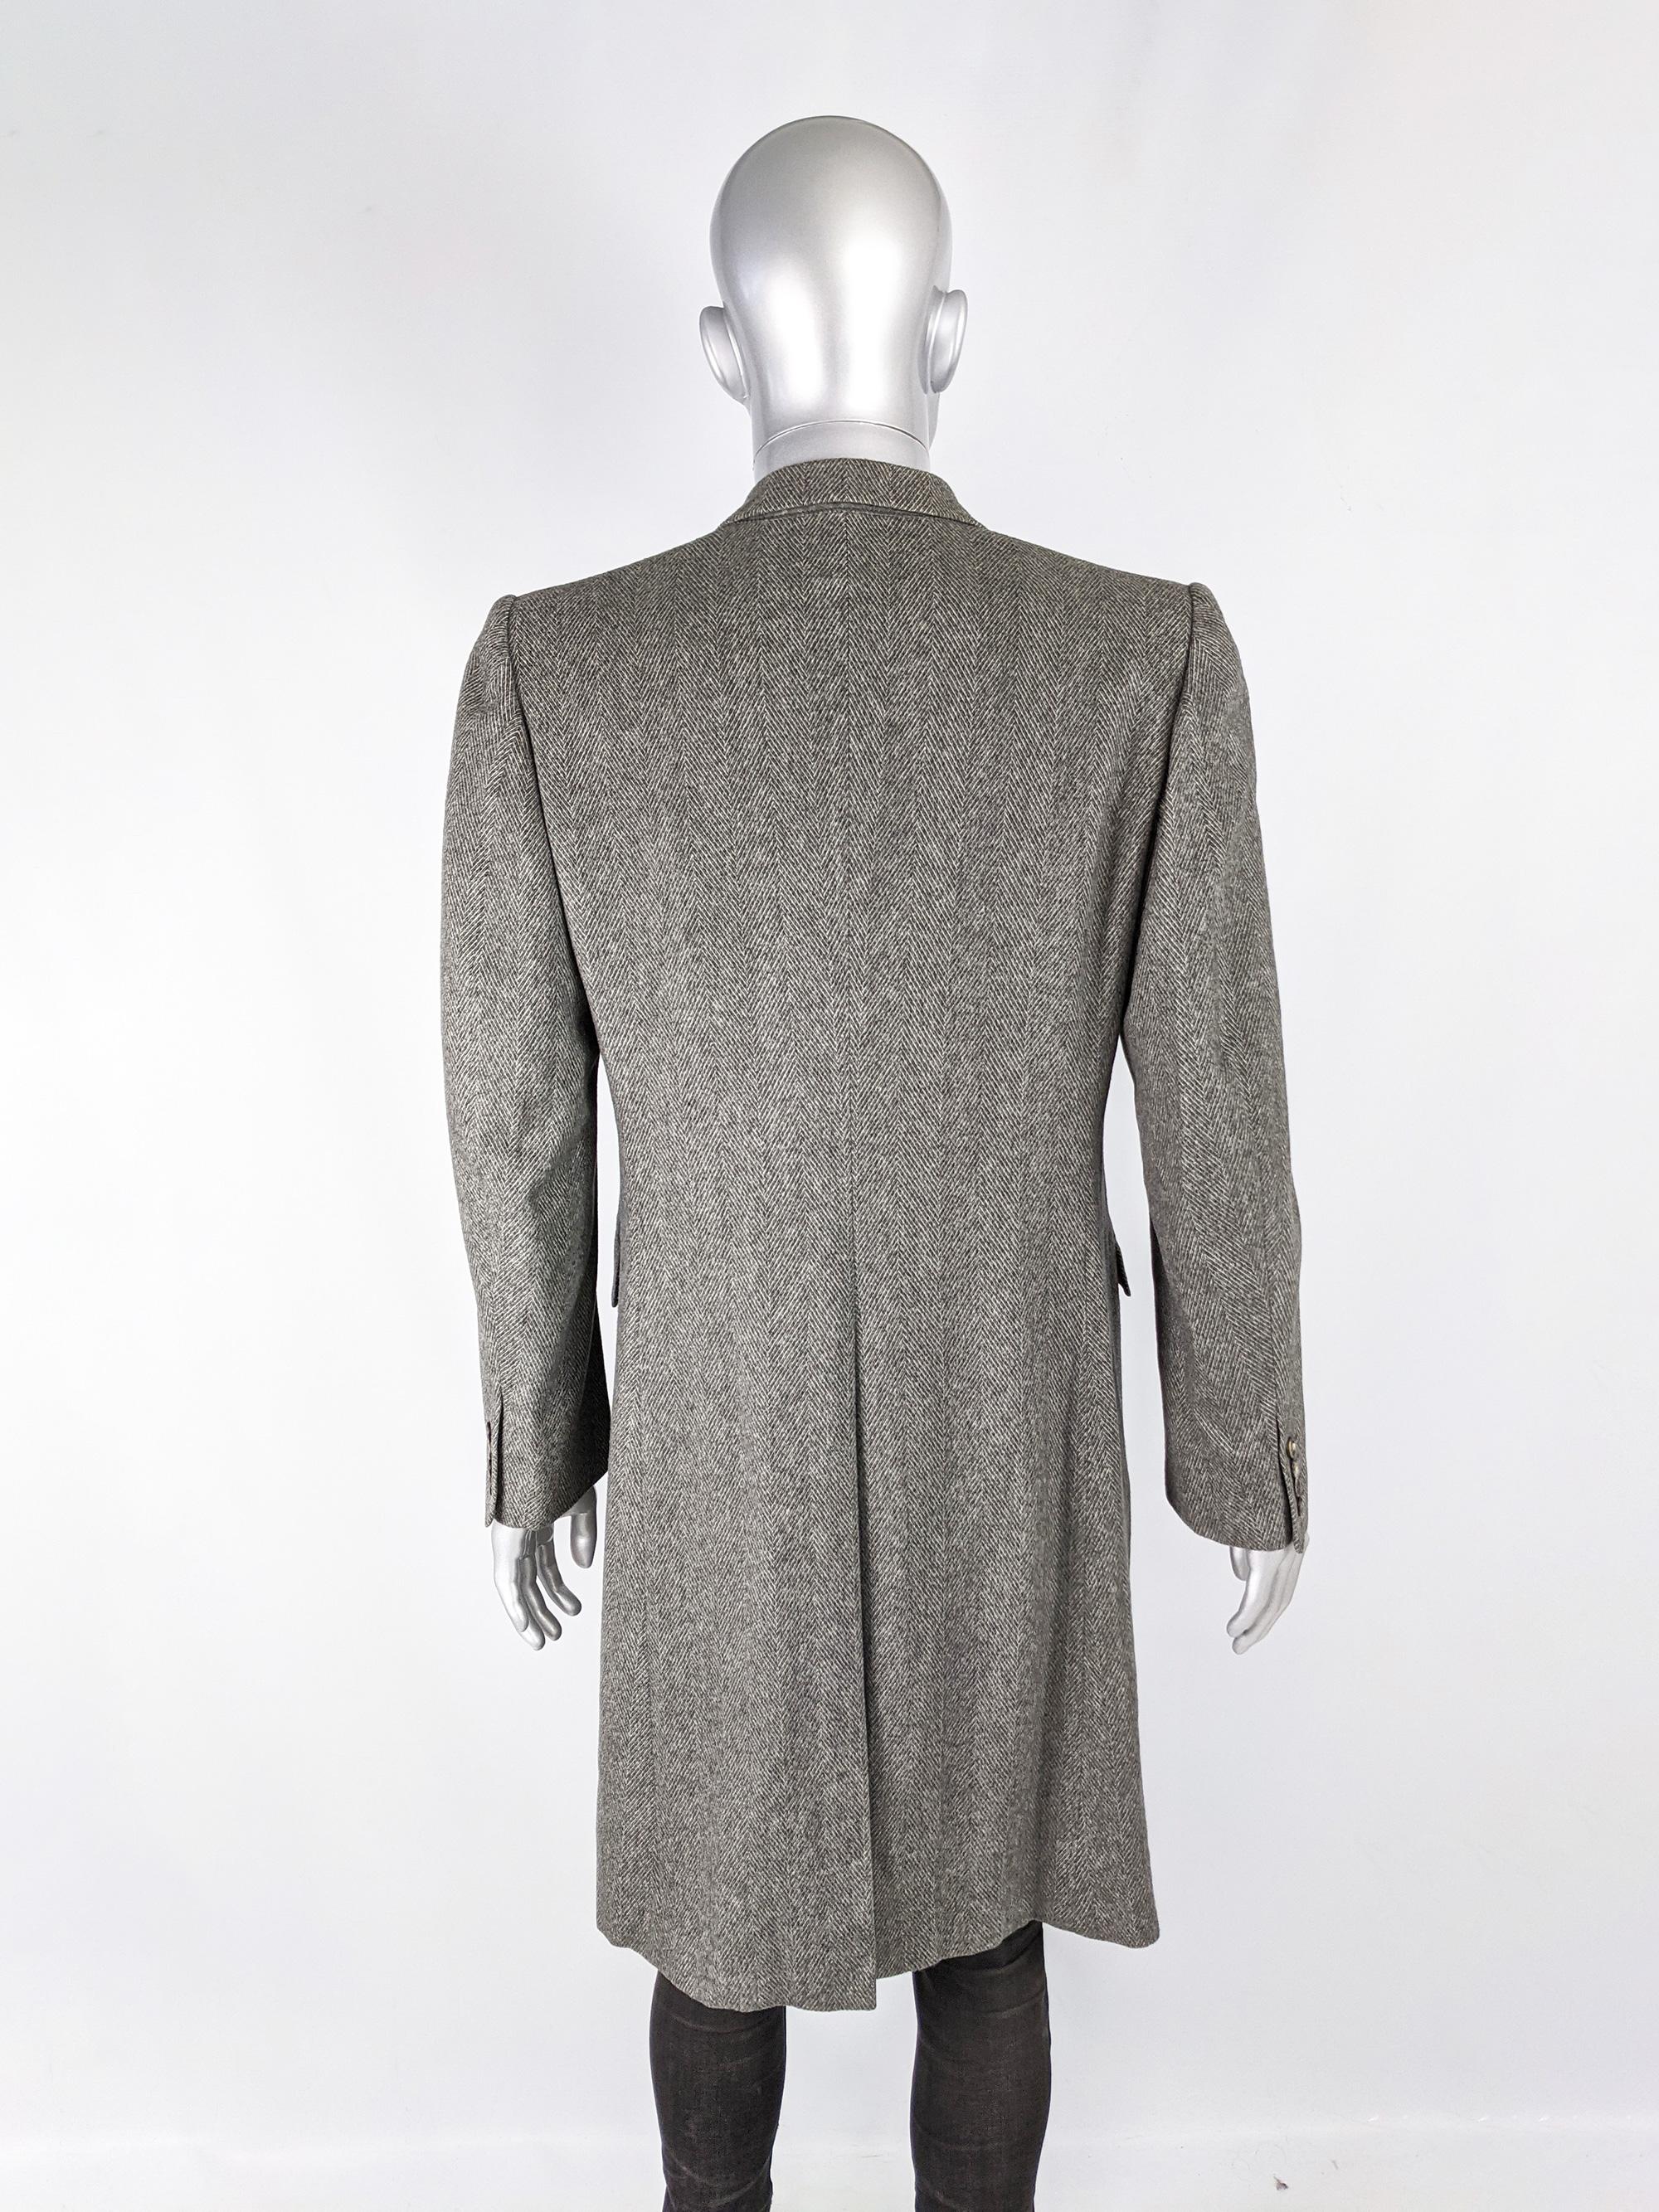 Alexander Mcqueen Archival Bold Shouldered Pure Cashmere Overcoat, A/W 2007 2